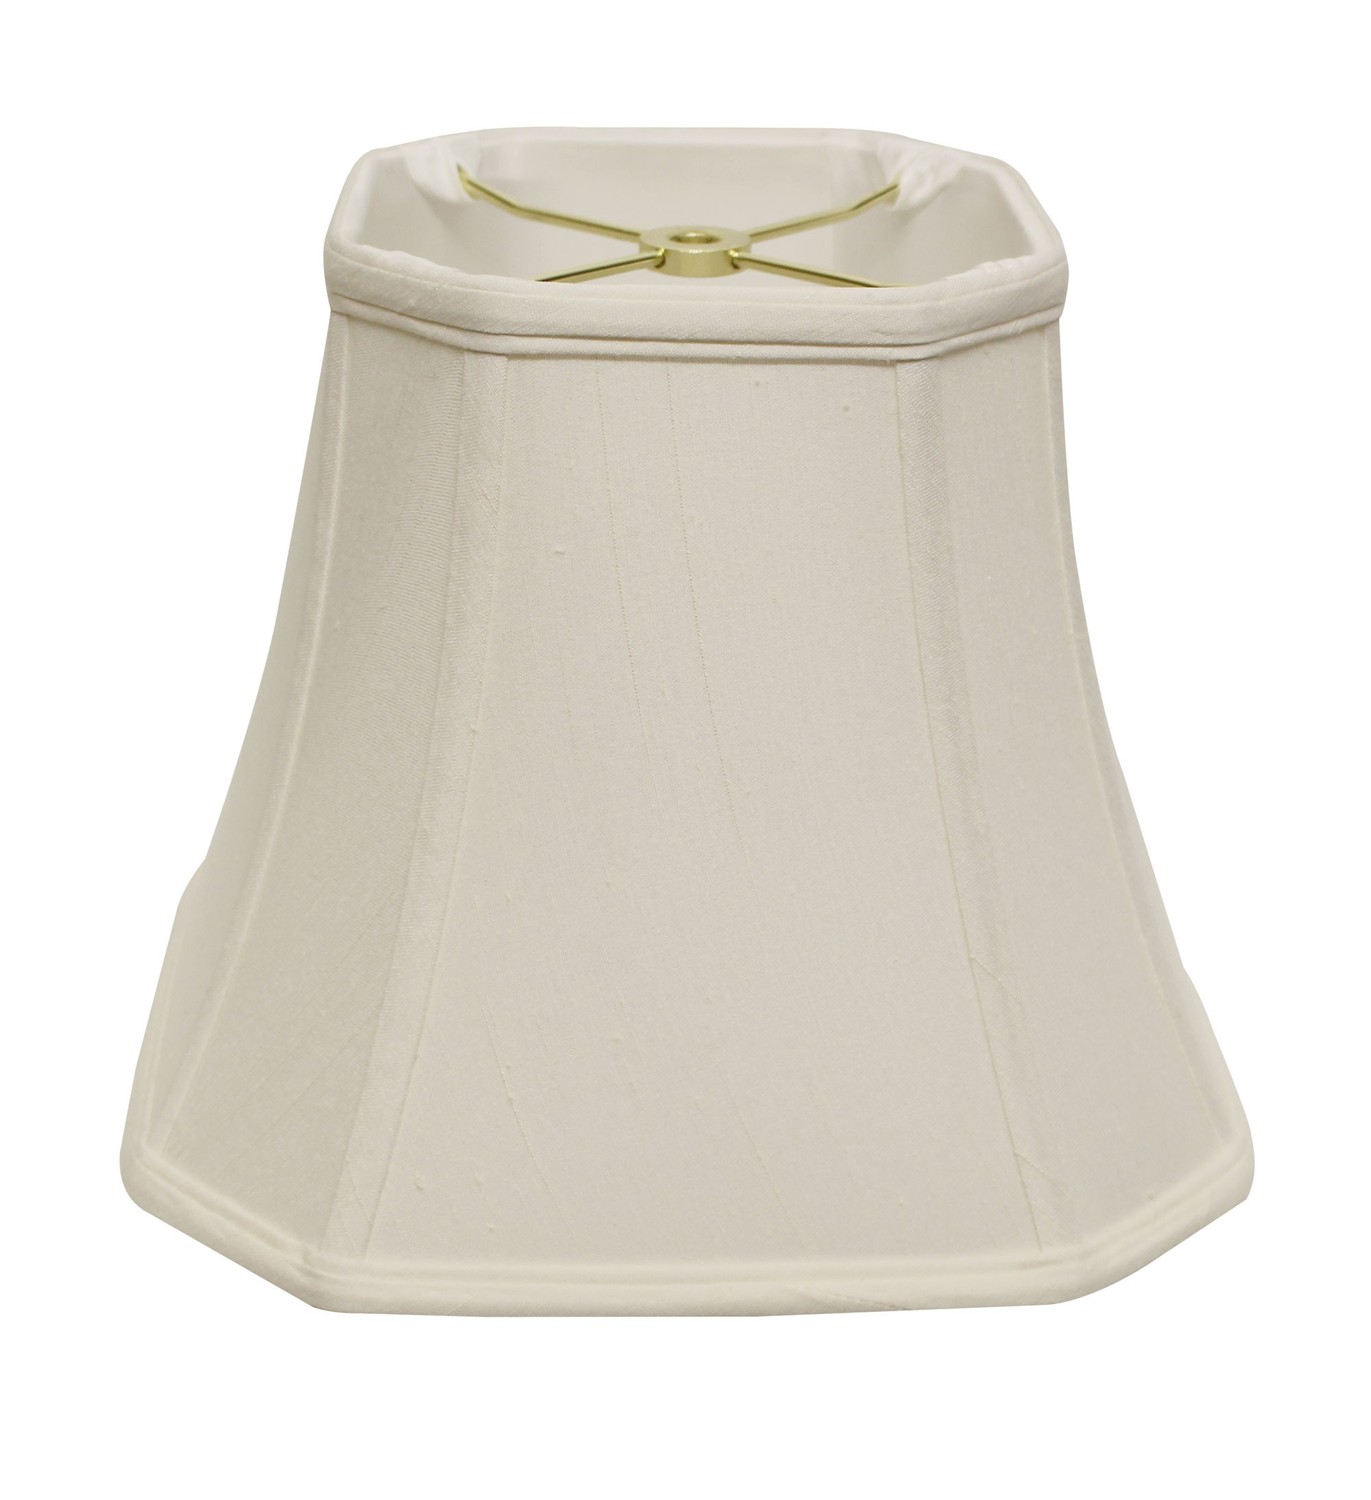 10" White Slanted Square Bell Monay Shantung Lampshade